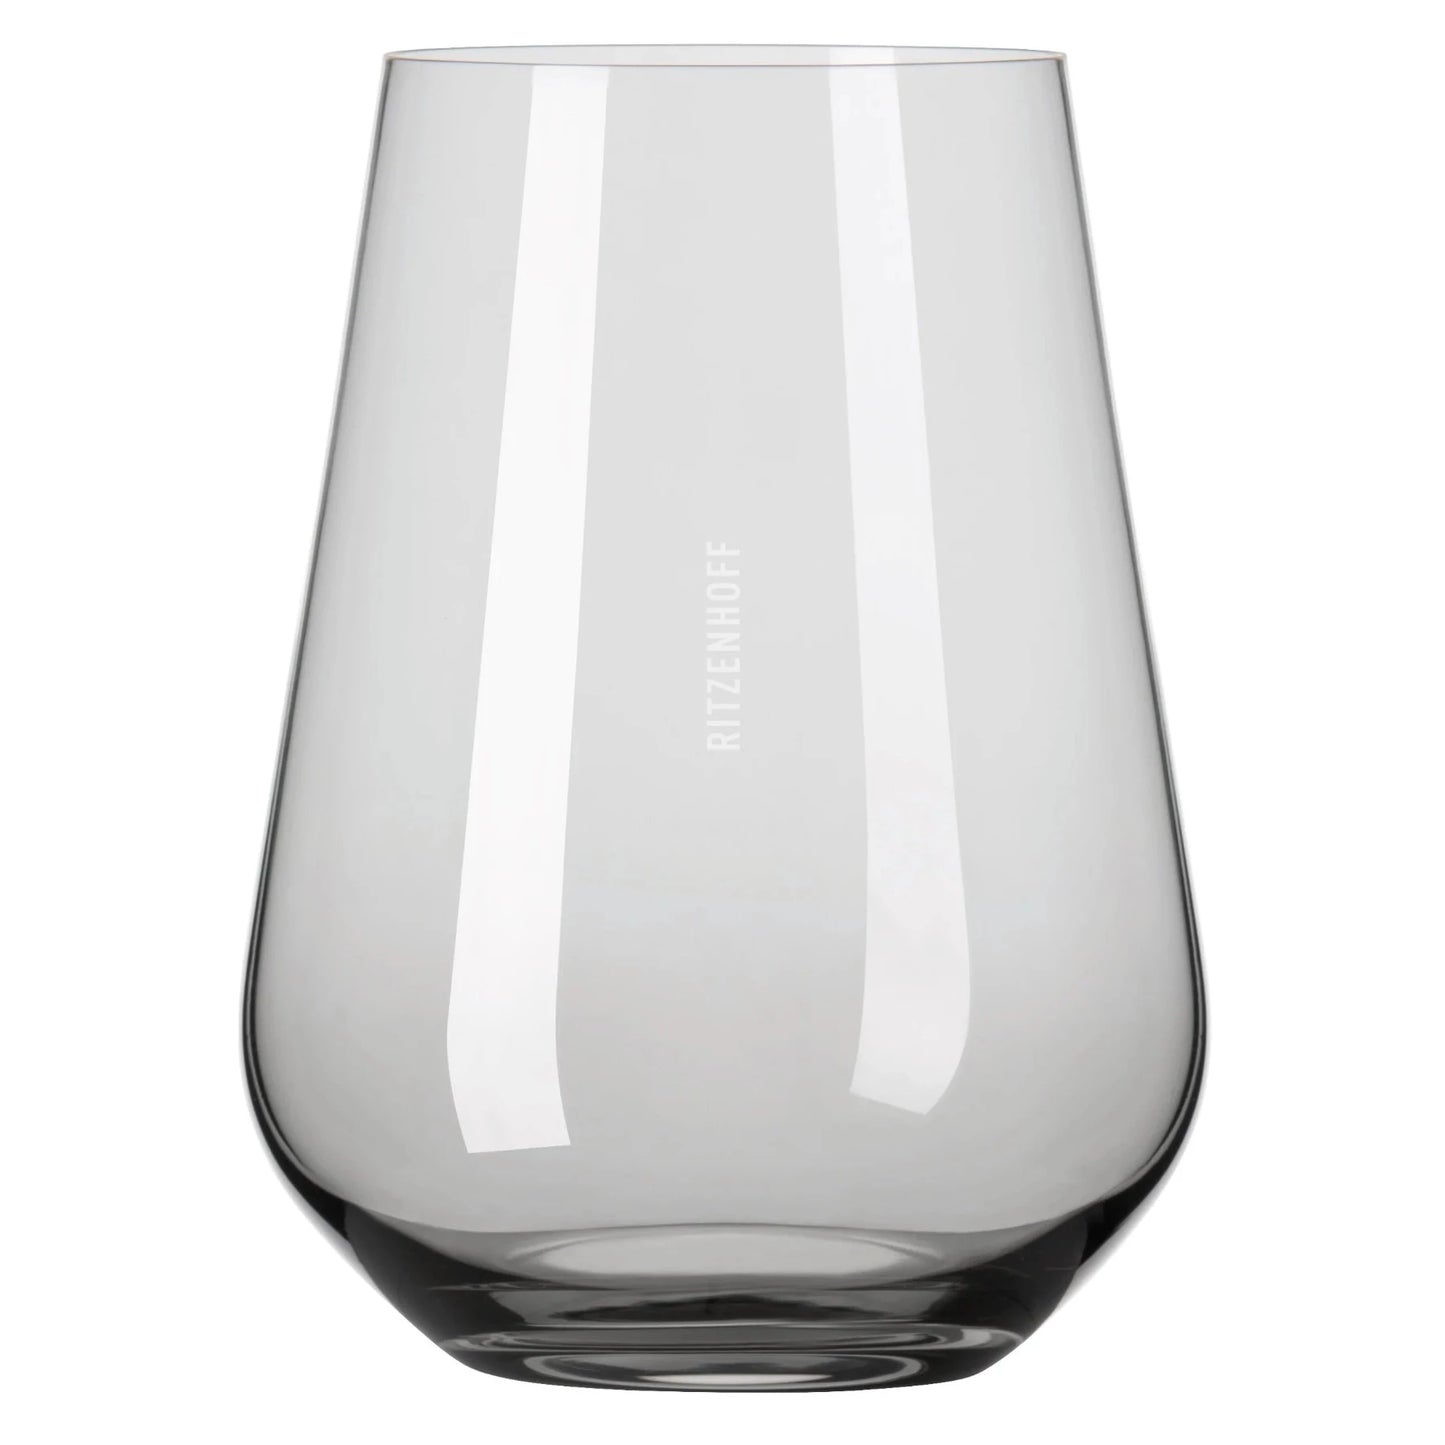 Fjord Light Water Glass,Grey, Set of 2